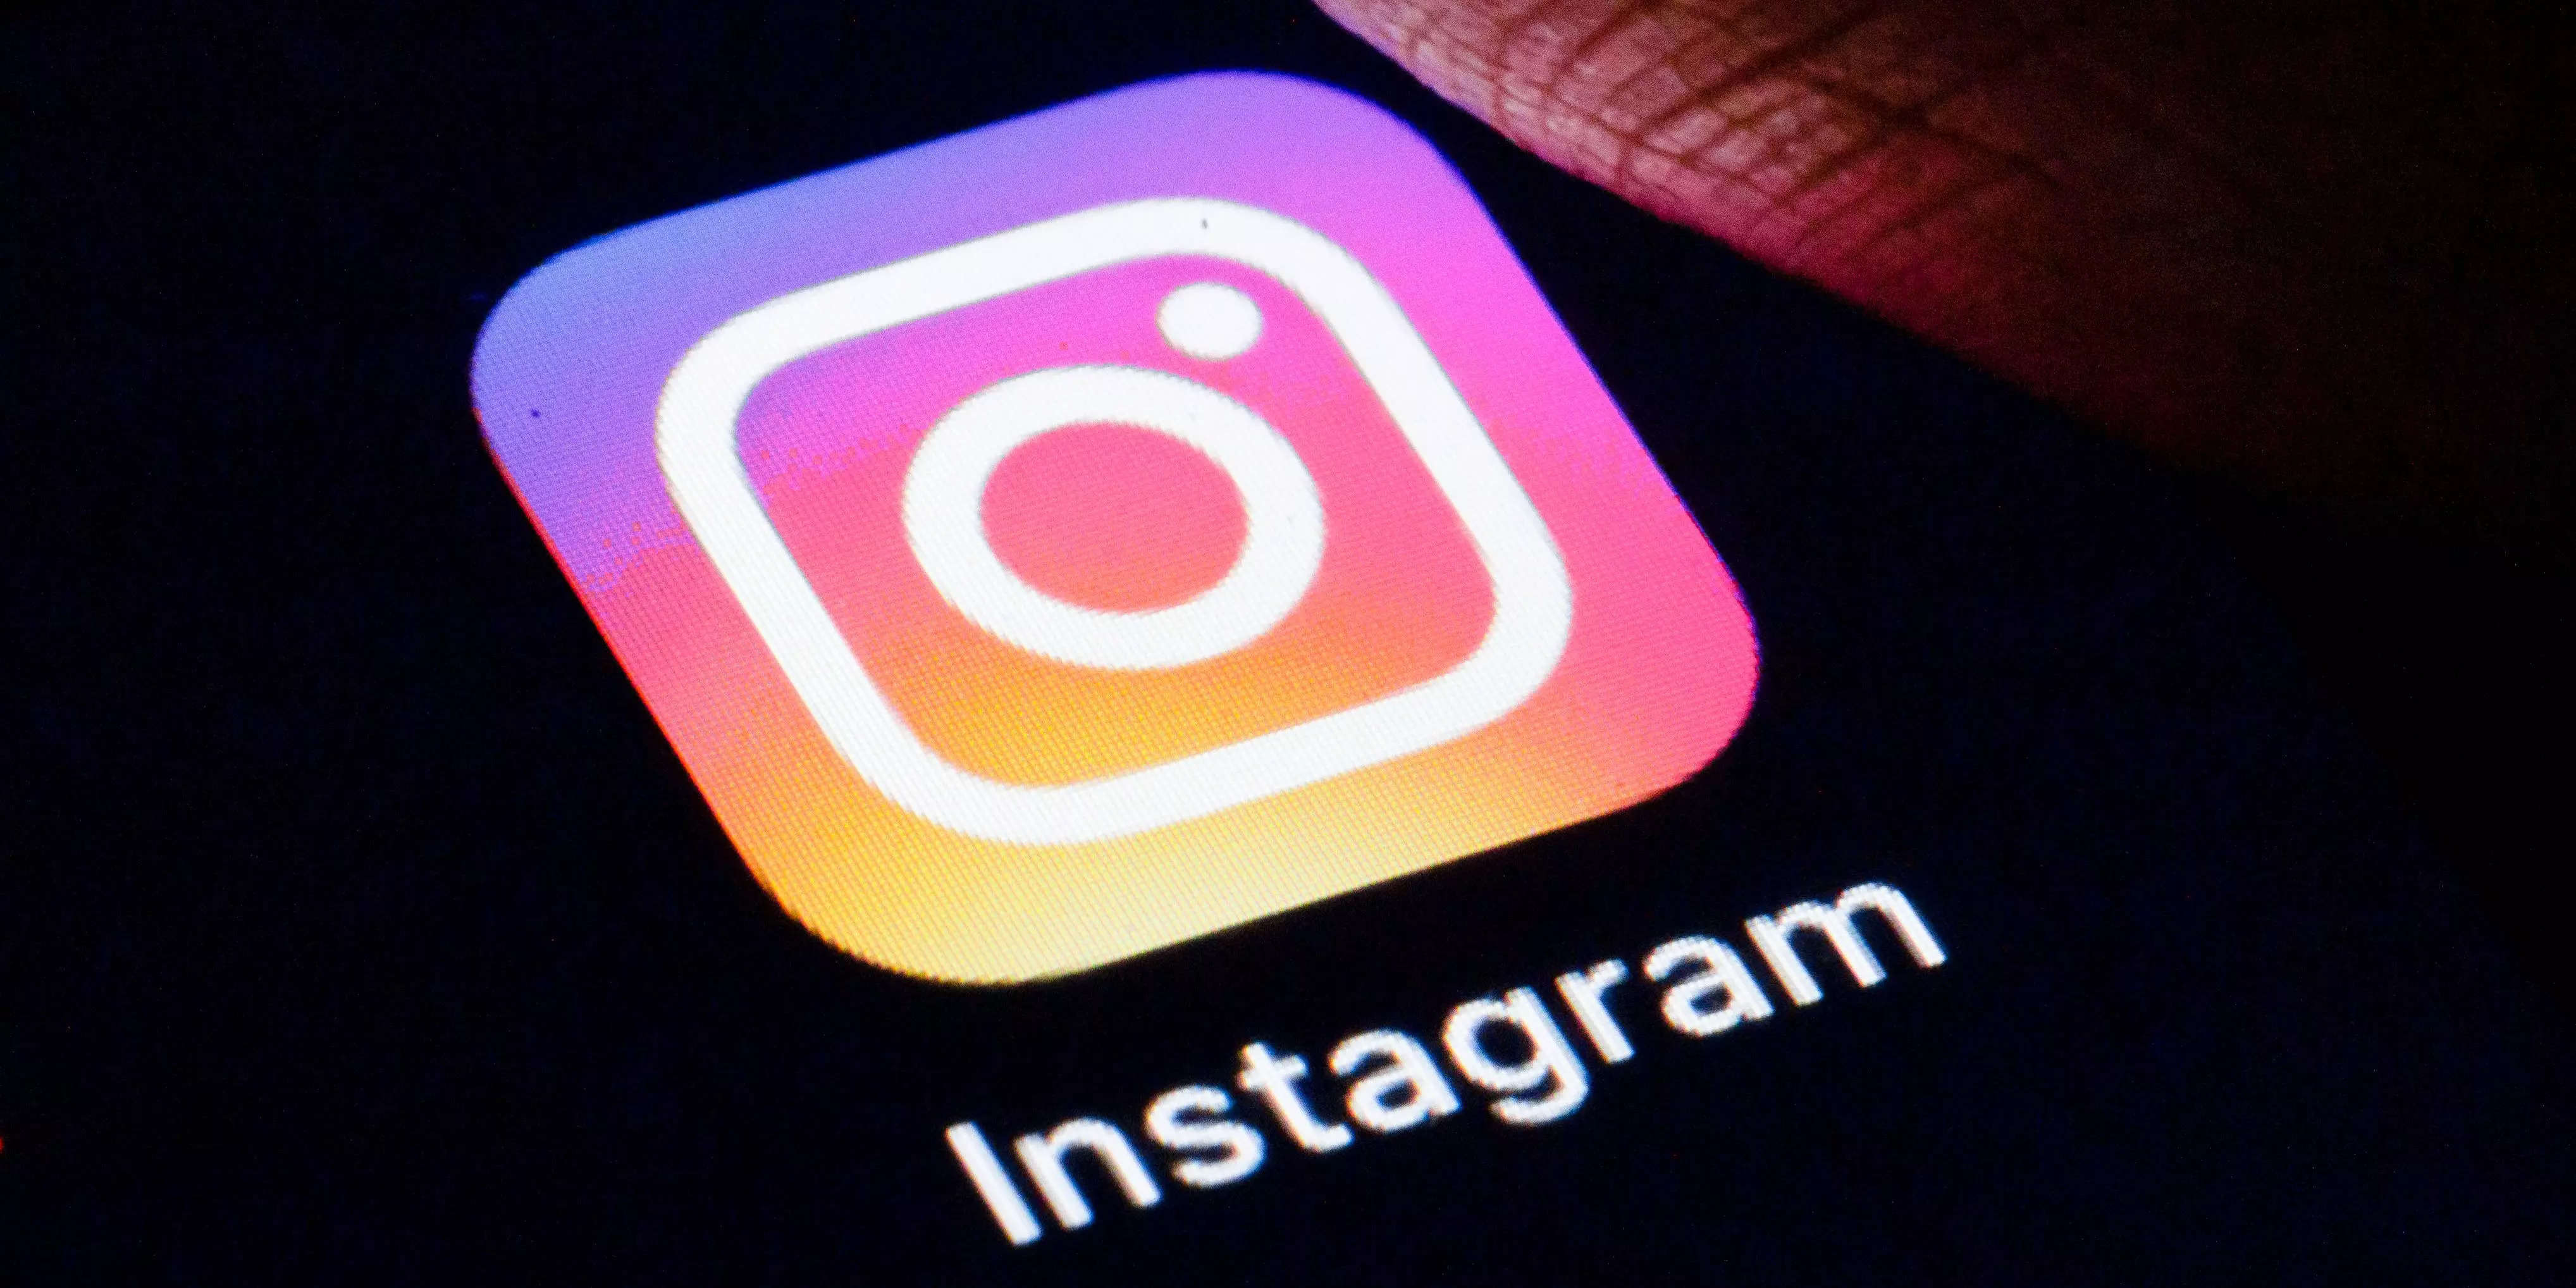 3 ways to see who unfollowed you on Instagram